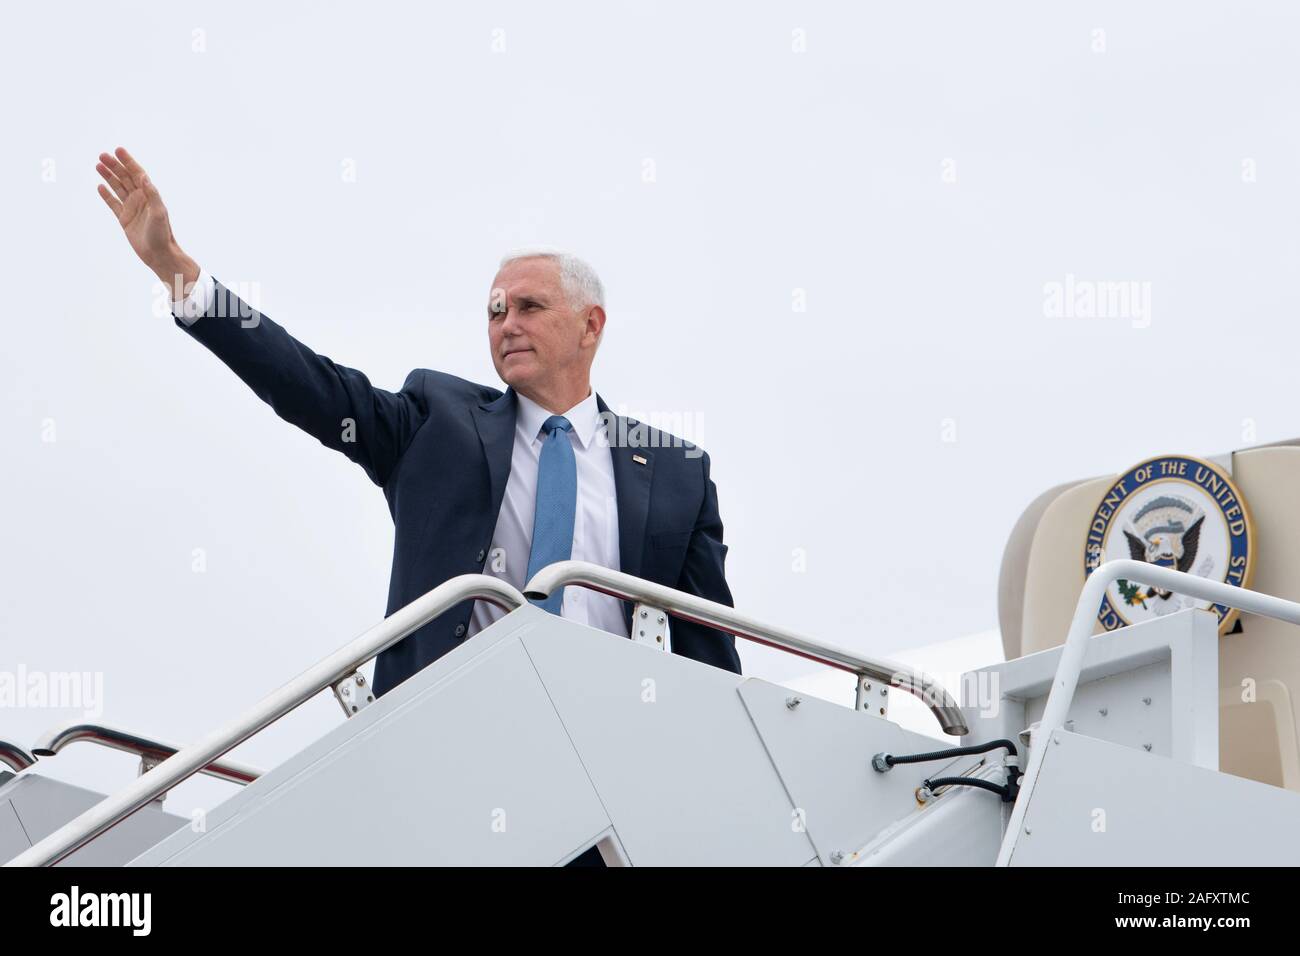 Vice President Mike Pence waves before boarding Air Force Two at Joint Base Andrews, Md., Nov. 20, 2019.  Pence traveled aboard a Boeing C-32 flown by pilots from the 89th Airlift Wing to visit Fincantieri Marinette Marine in Wisconsin. The 89th Airlift Wing ensures safe, reliable and comfortable airlift support for the President and Vice President of the United States, cabinet members and other senior officials to include Congressional Delegations, Supreme Court Justices and Ambassadors, as well as senior officers within the DoD. (U.S. Air Force Photo/ Tech. Sgt. Robert Cloys) Stock Photo